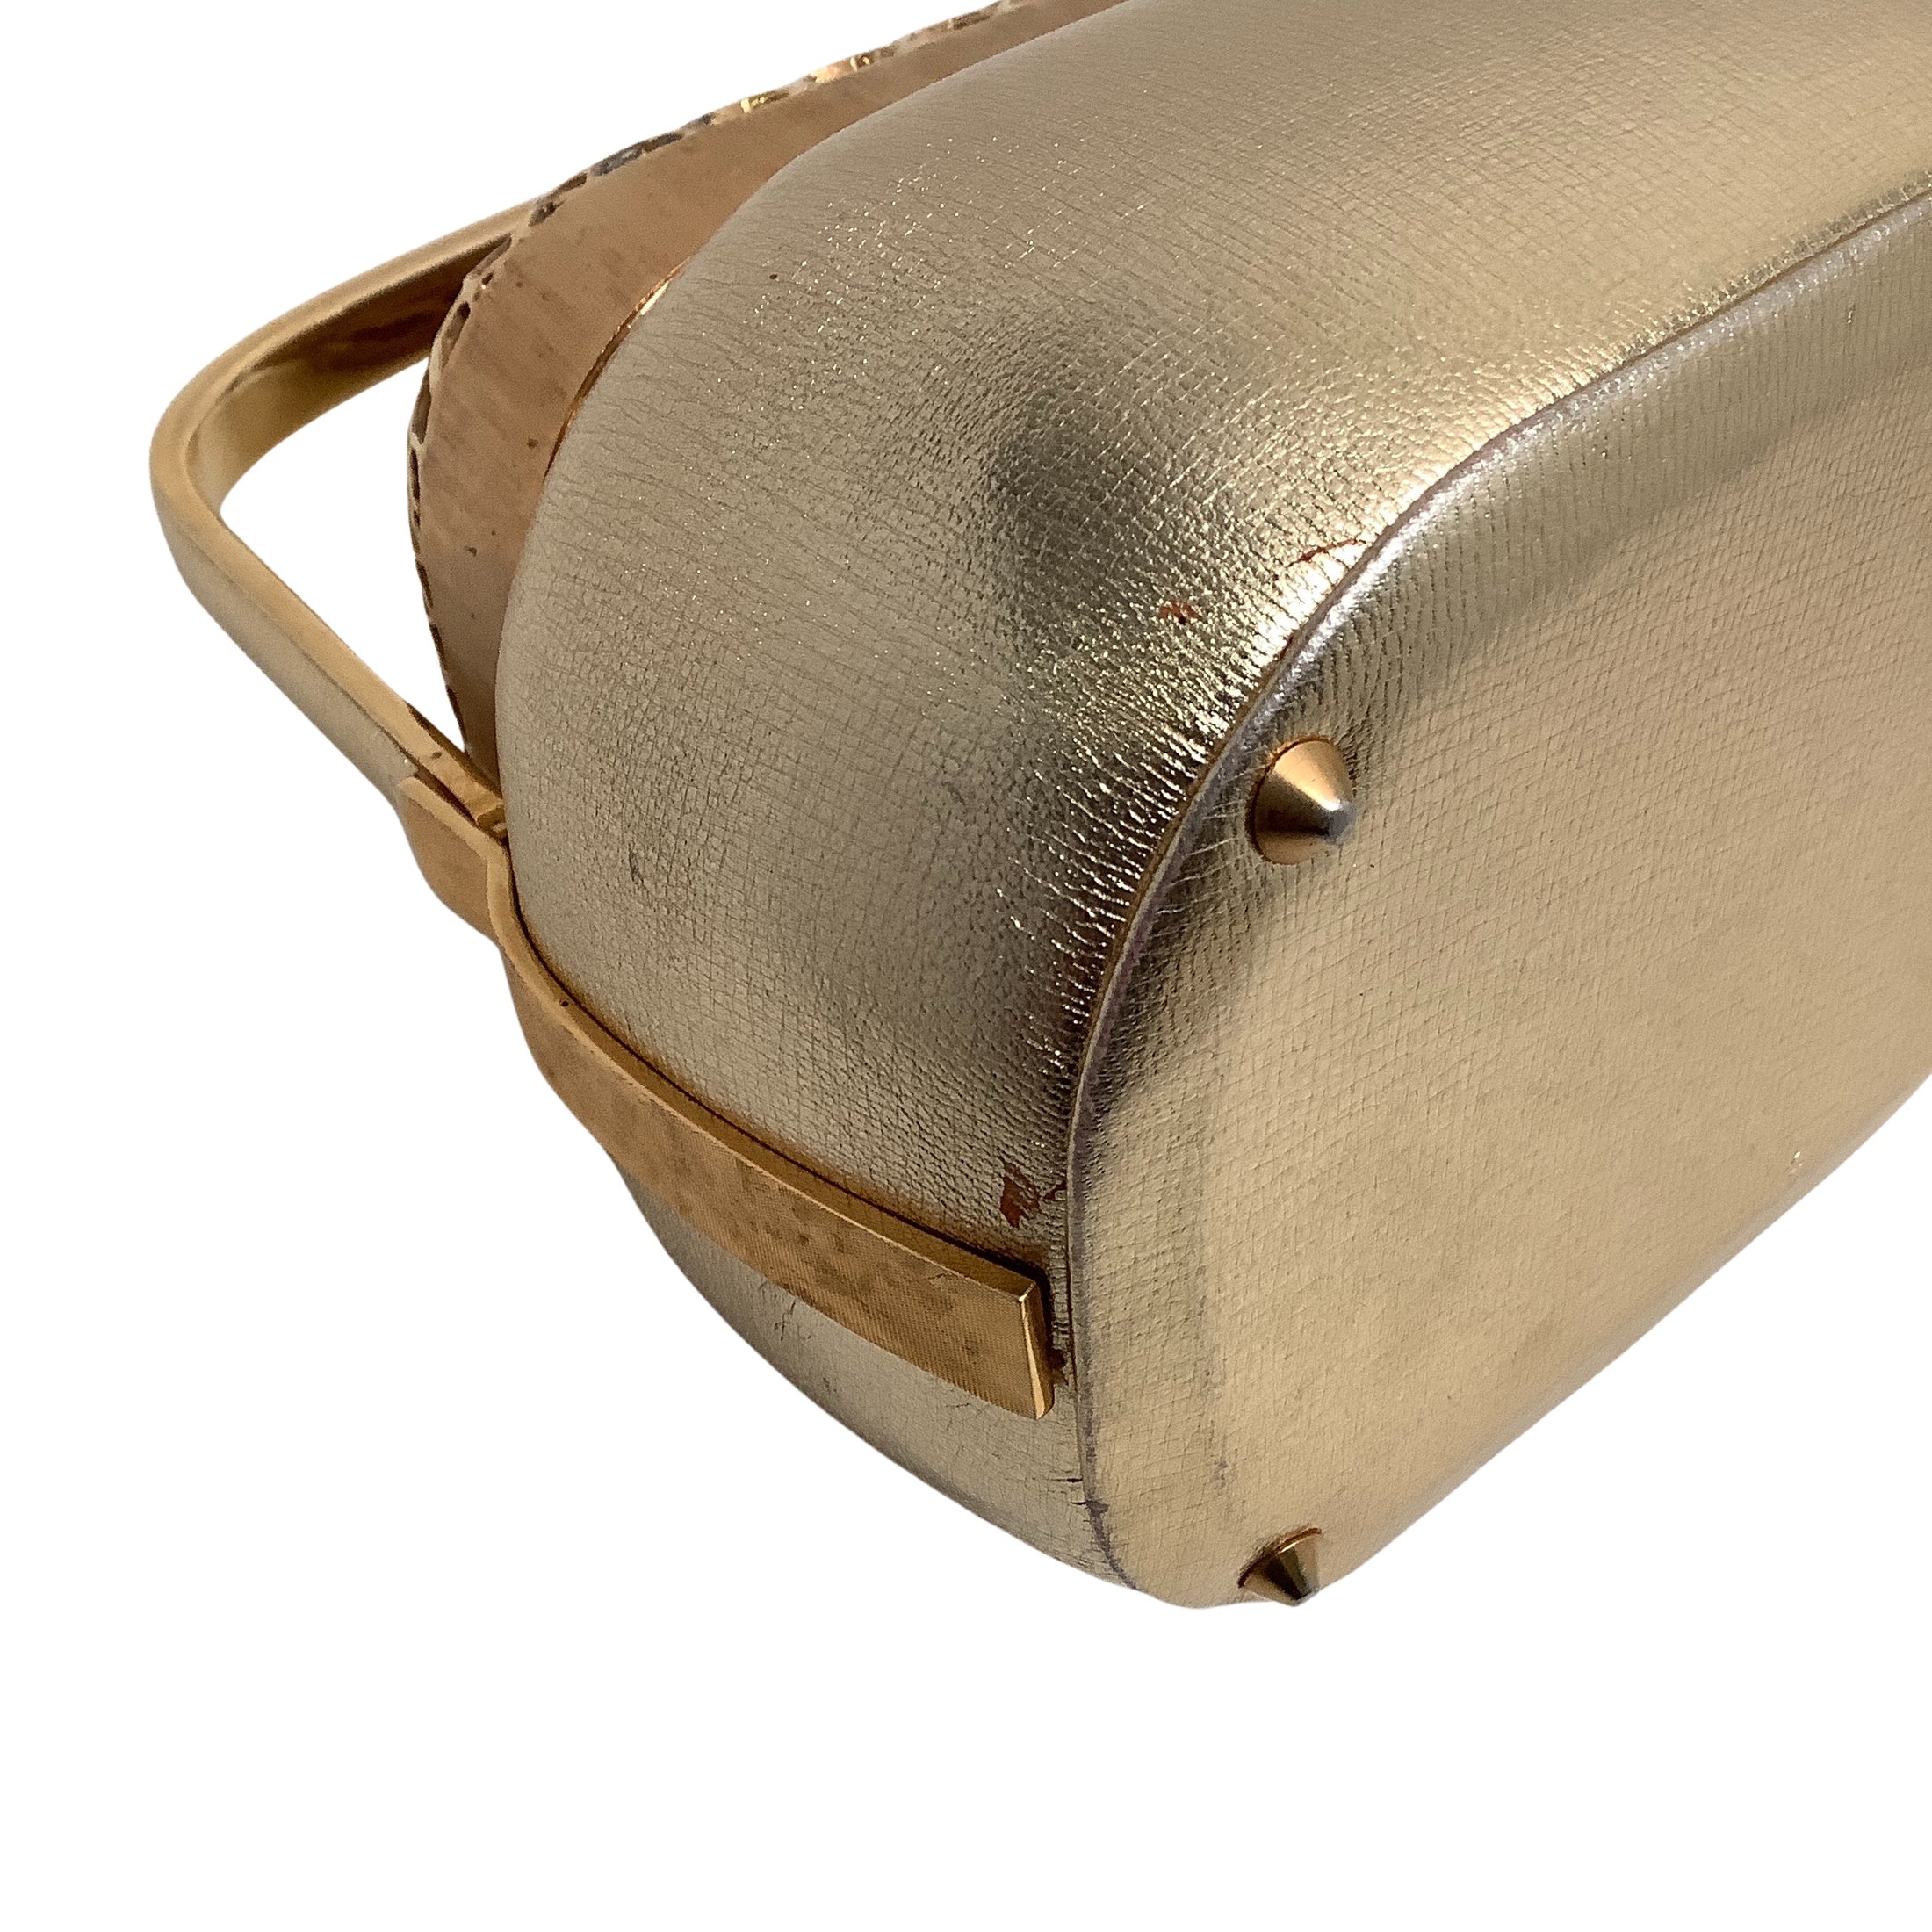 Judith Leiber Vintage Gold Leather Evening Bag with Metal Mesh Top